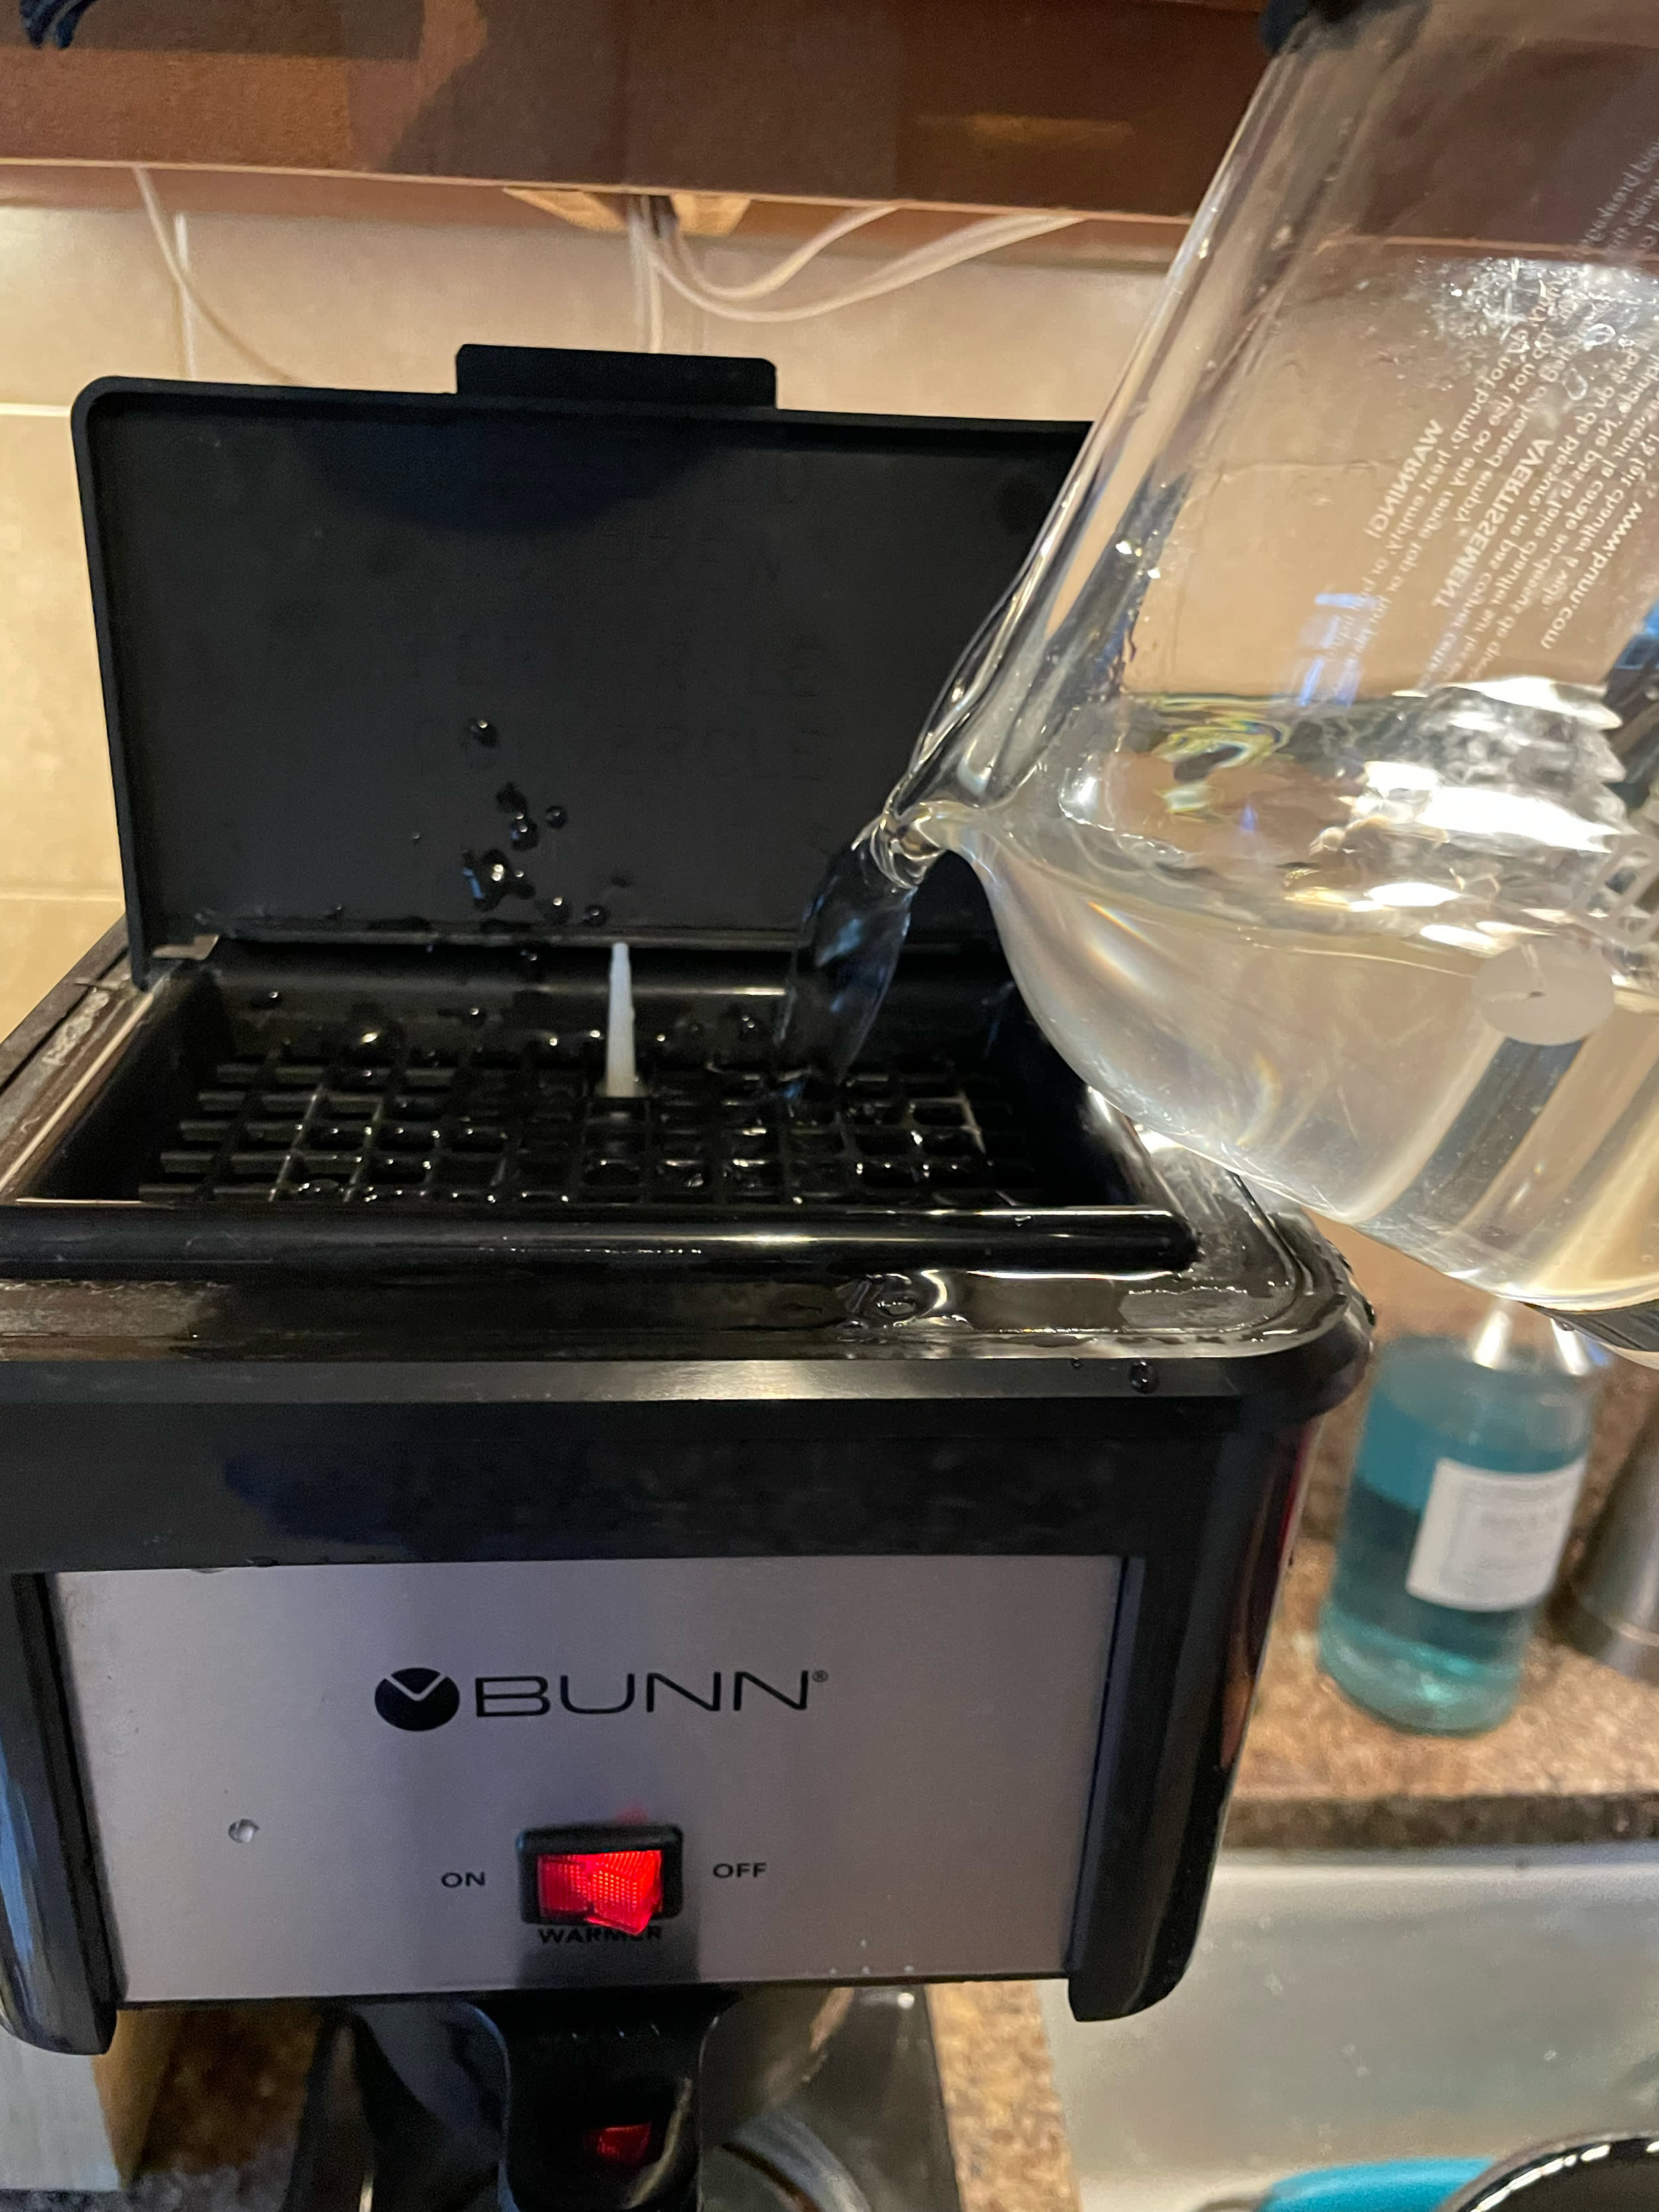 BUNN BX Speed Brew Classic 10-Cup Coffee Brewer Review 2023